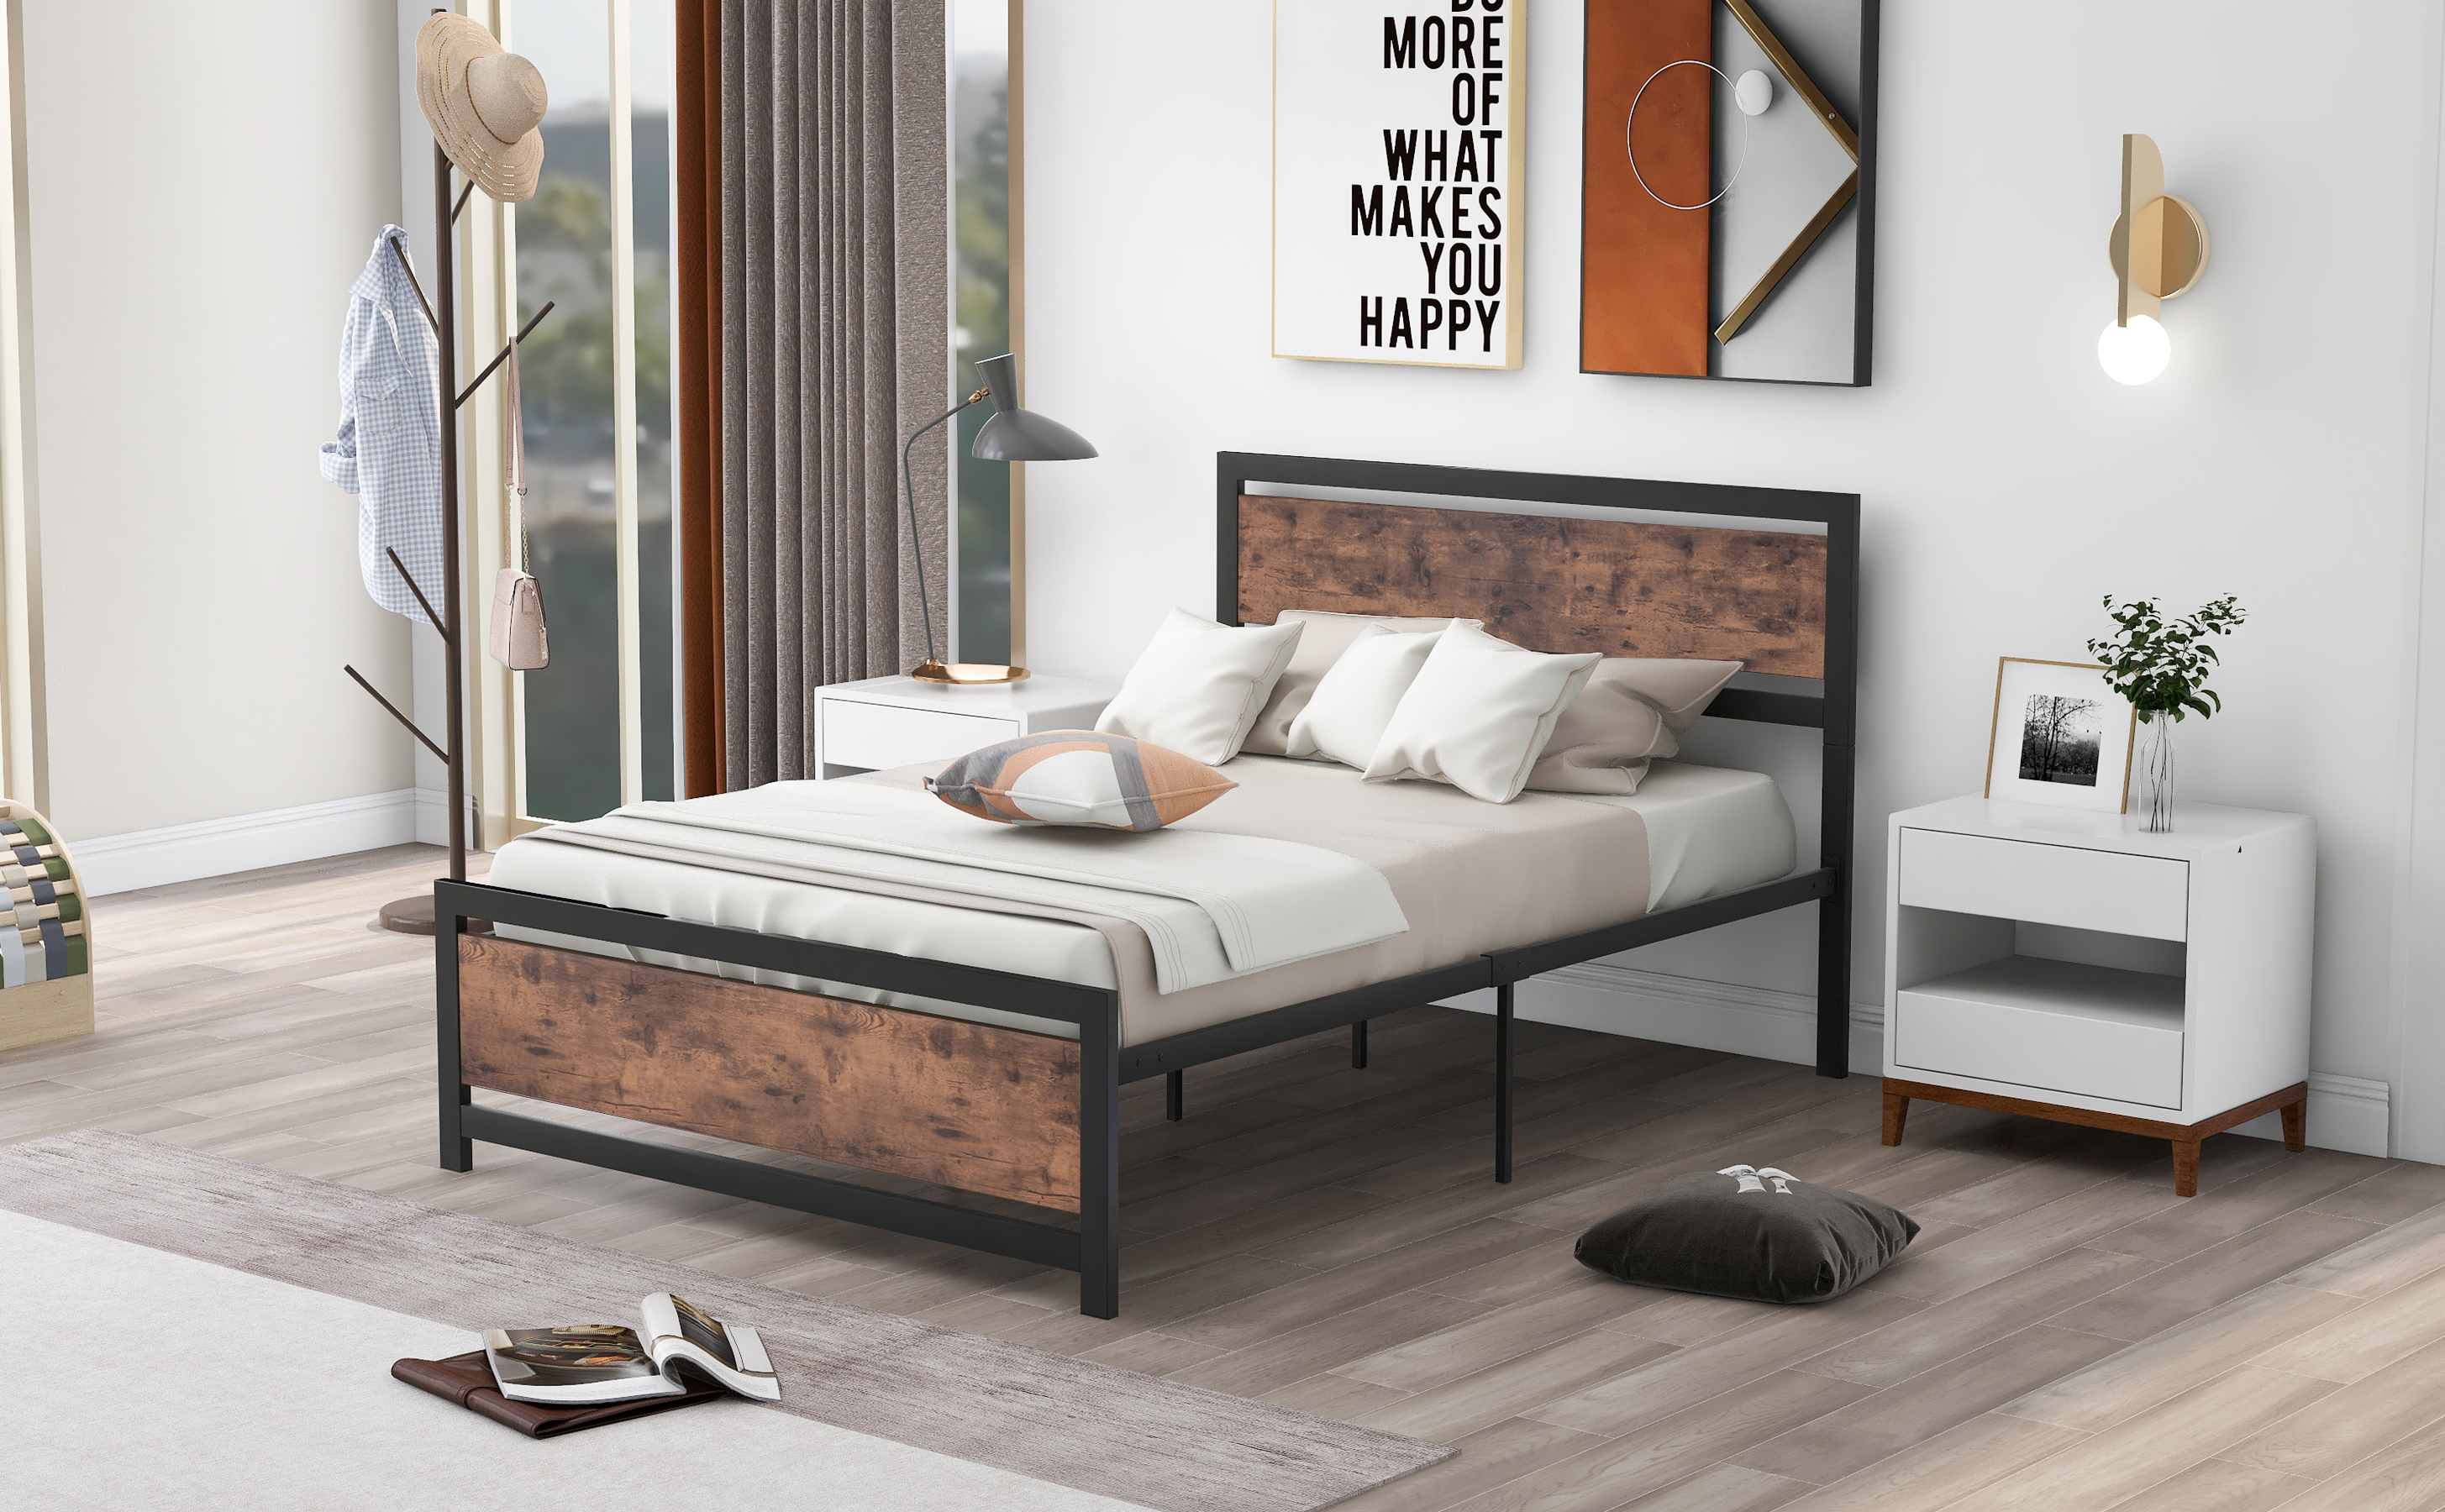 Queen Platform Bed Frame (Space saver bed / bed risers)